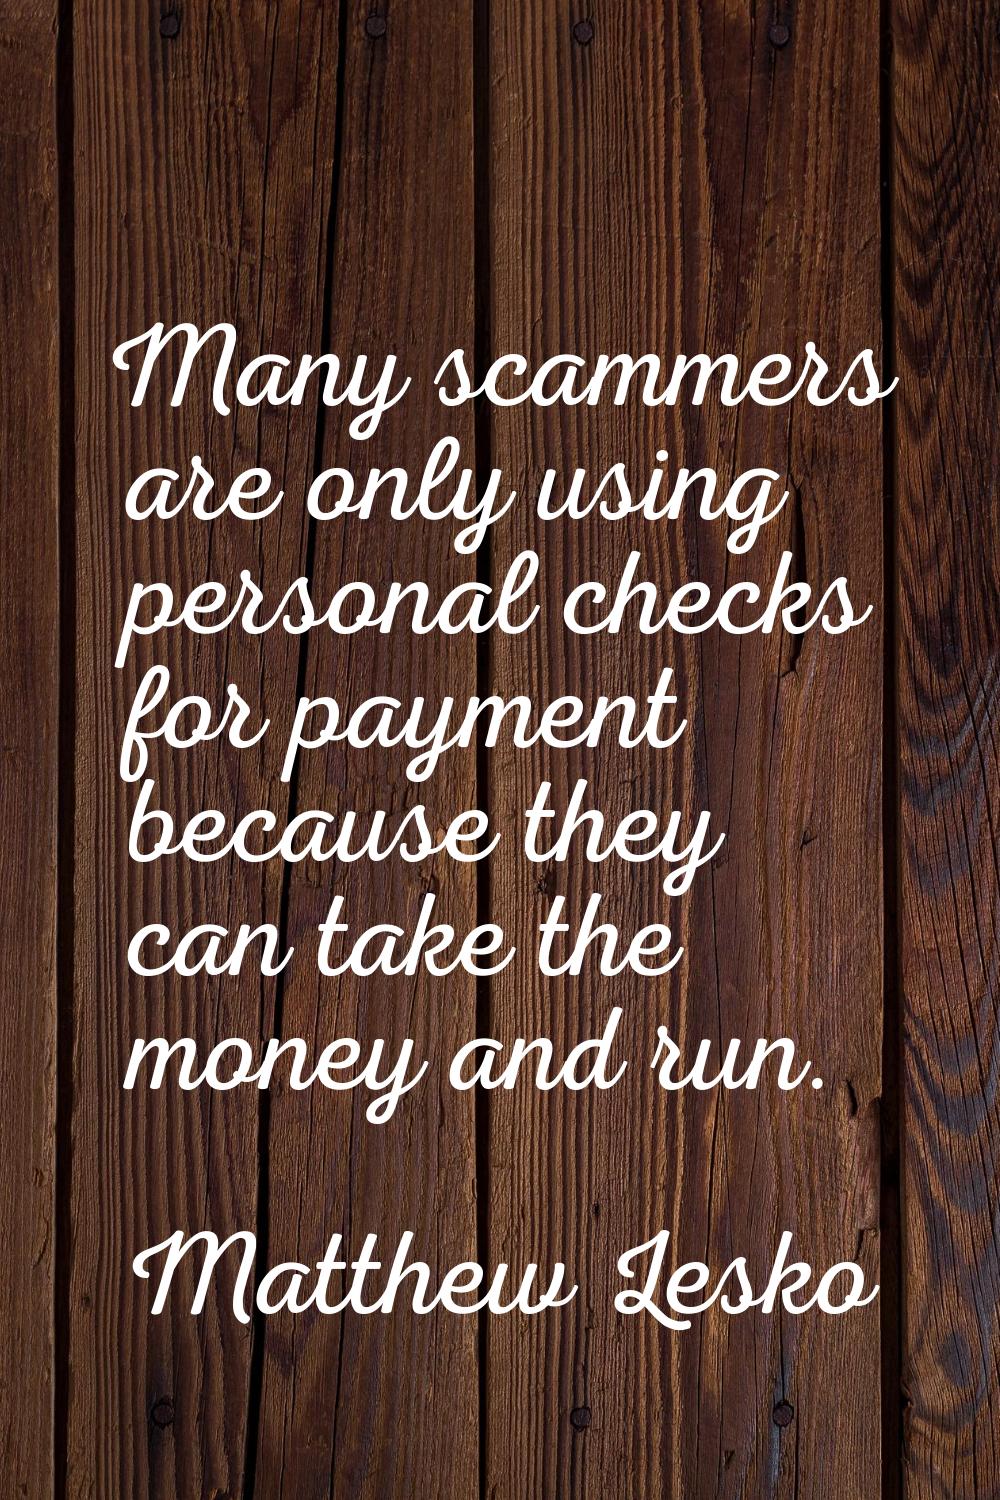 Many scammers are only using personal checks for payment because they can take the money and run.